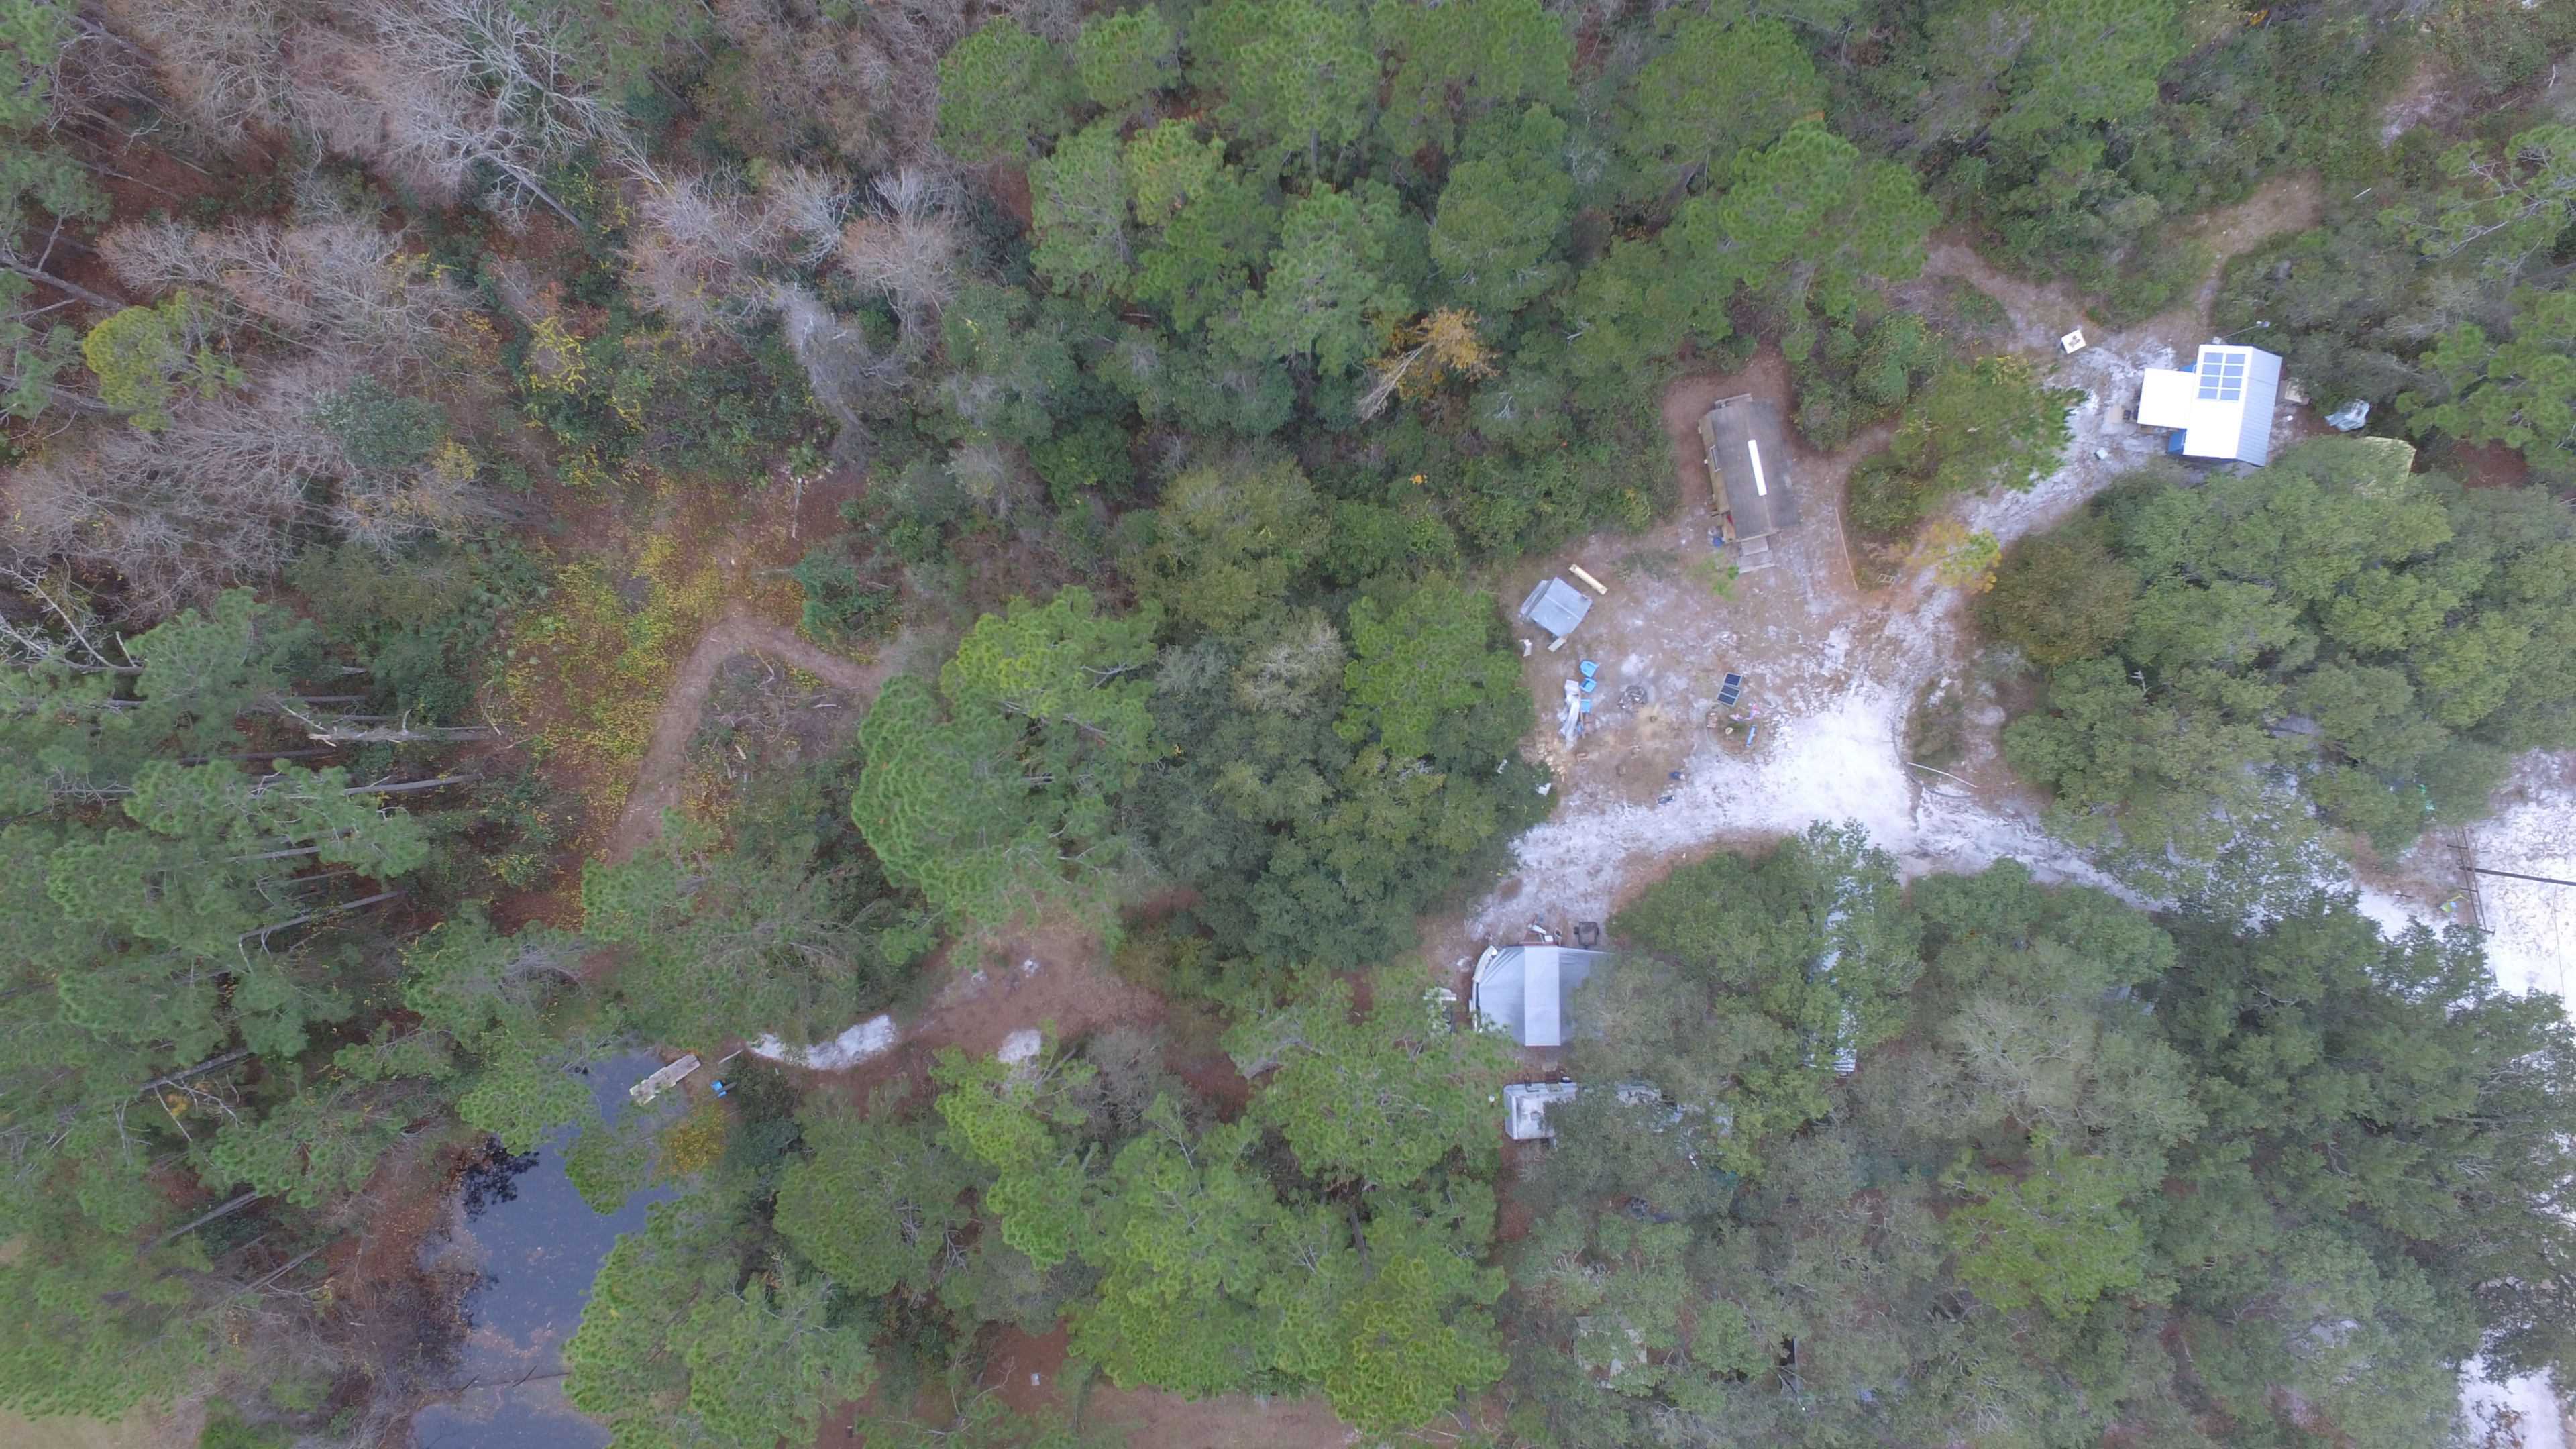 Aerial shot a guest took from his drone showing the original tiny house and pond.